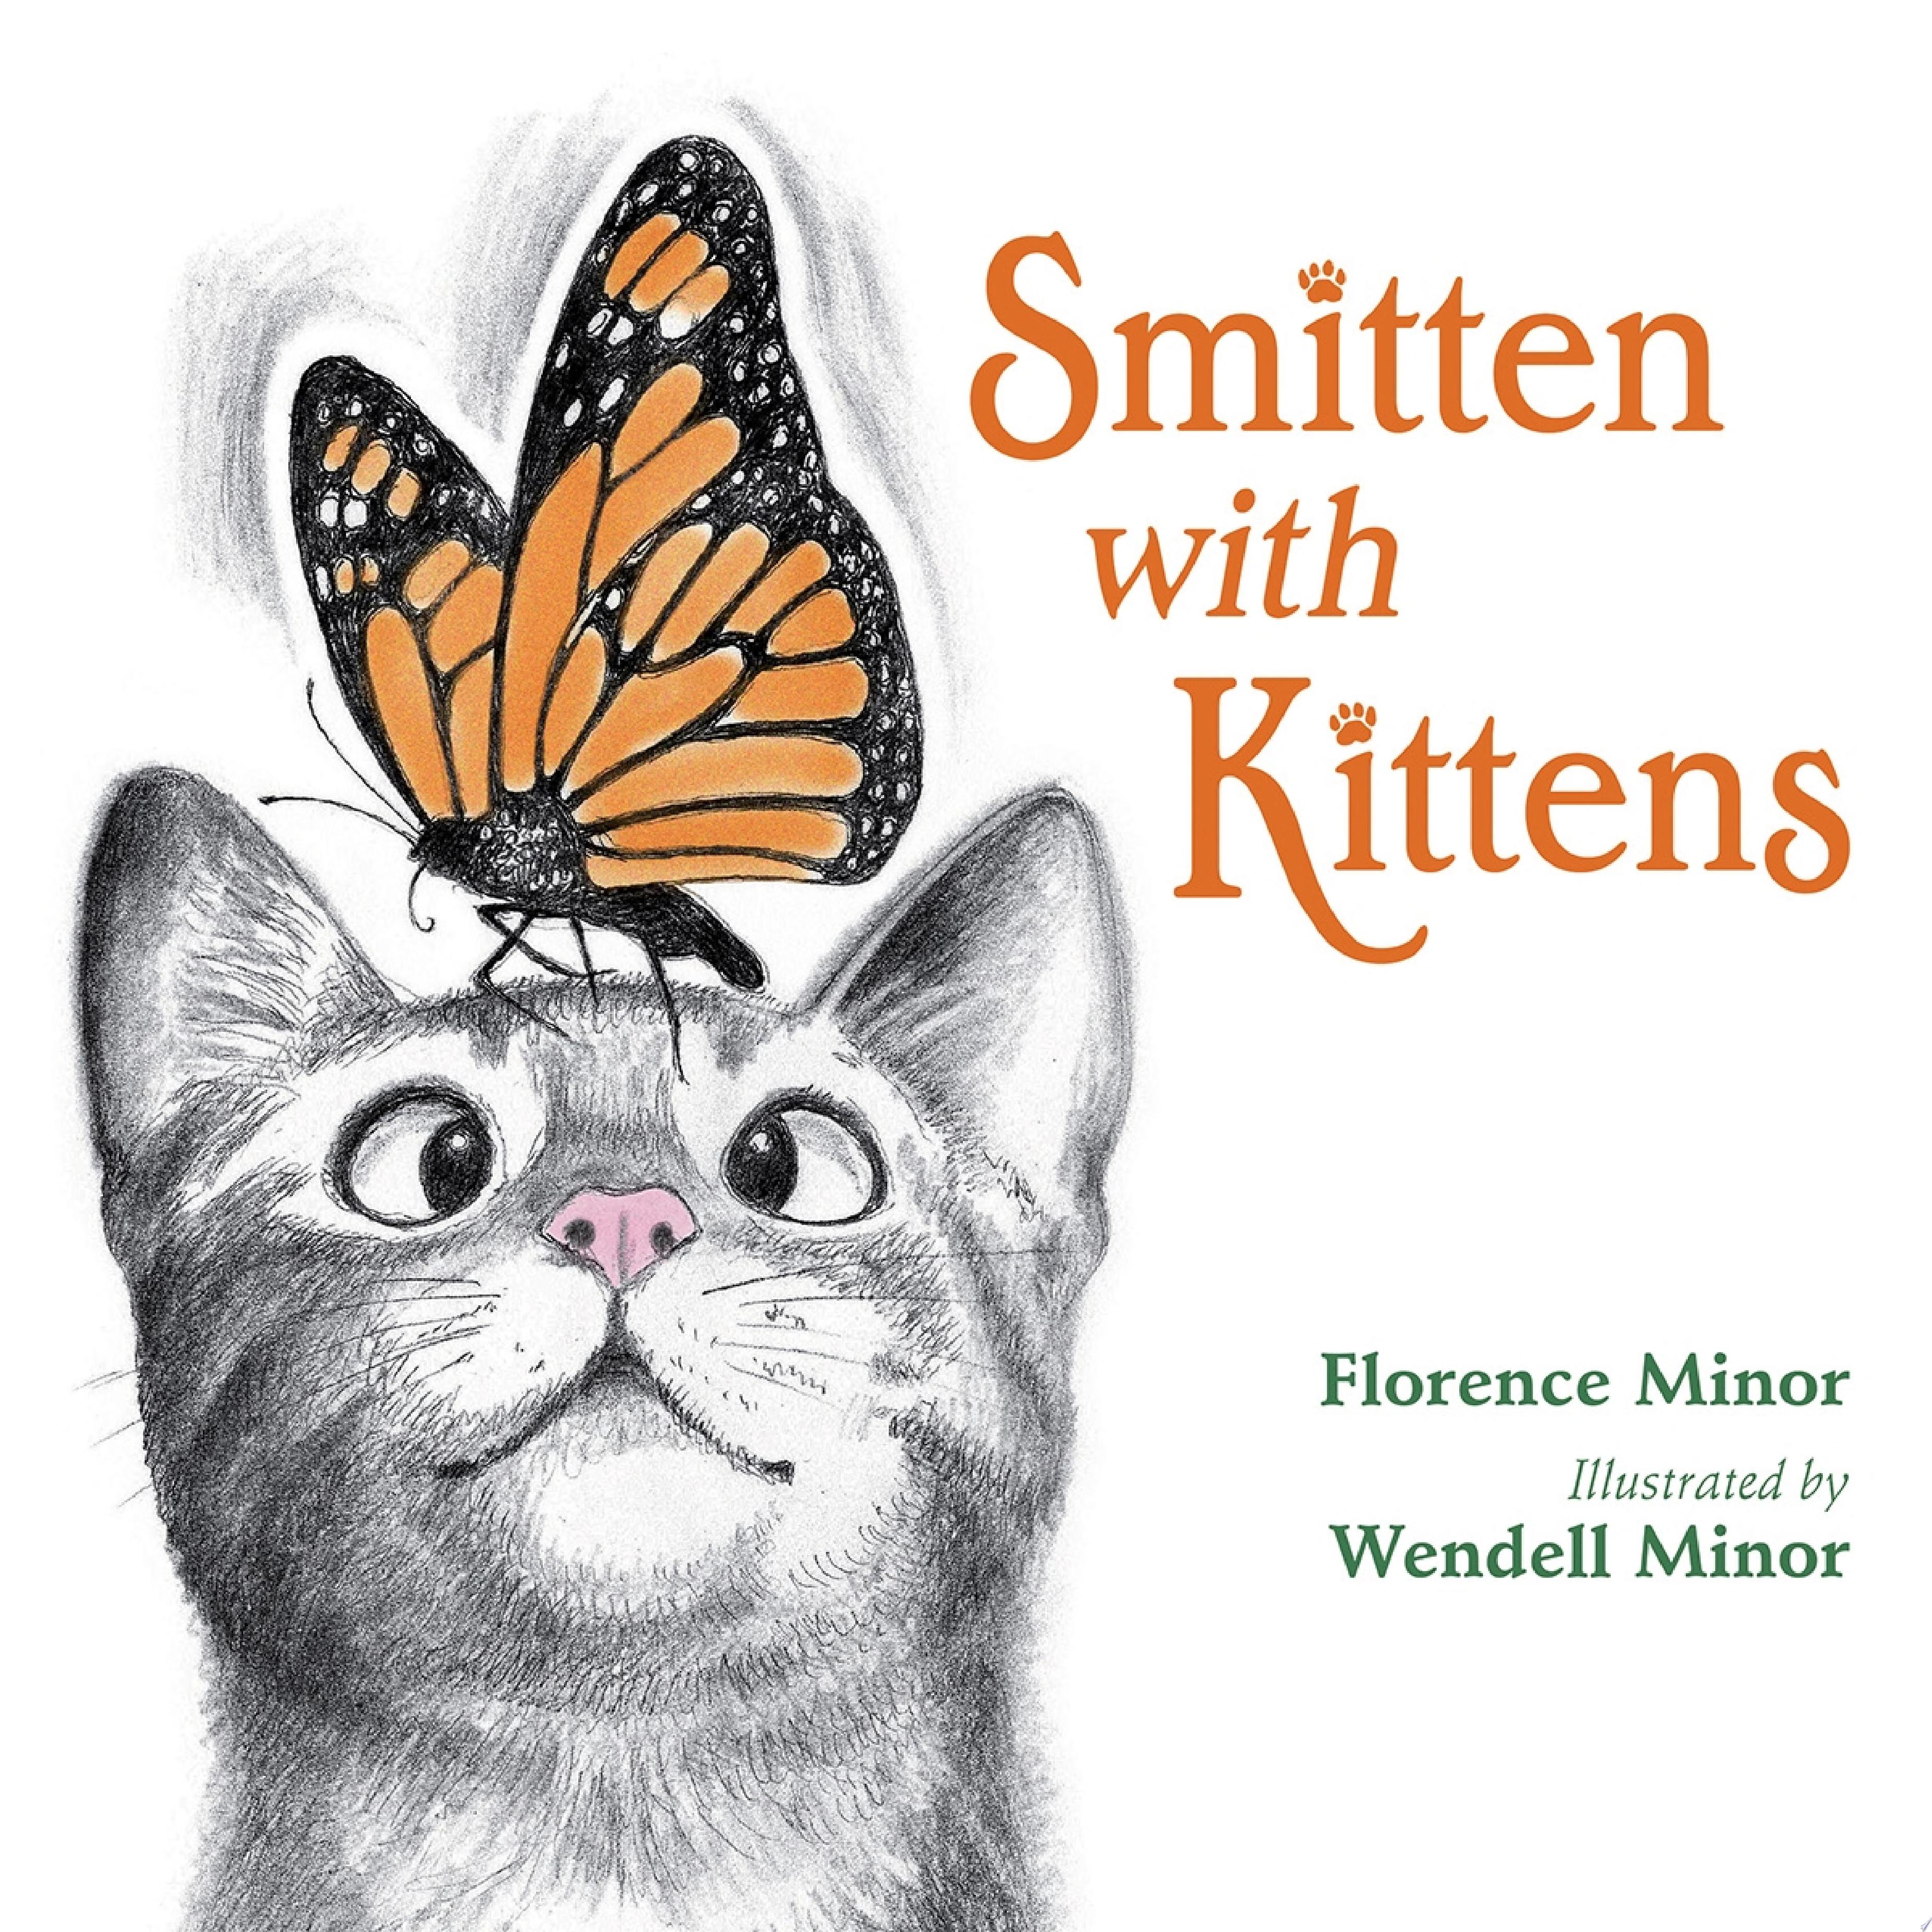 Image for "Smitten With Kittens"